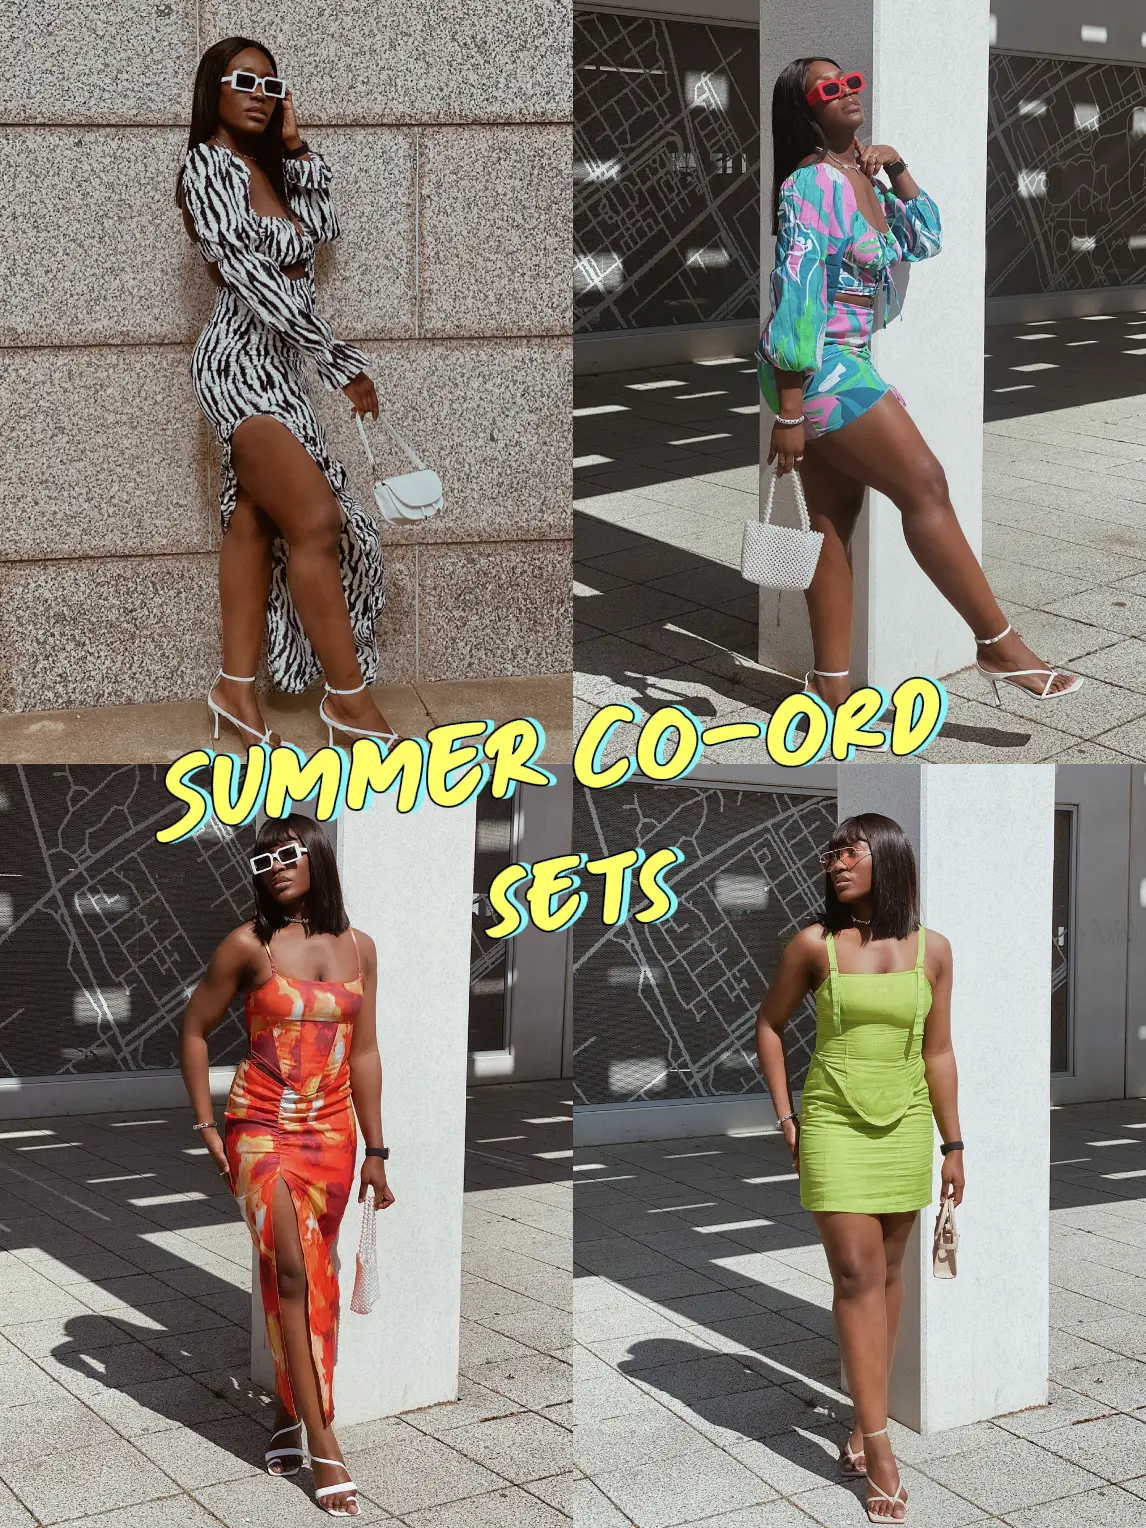 SUMMER CO-ORD SETS💛✨, Gallery posted by MakkyLawson